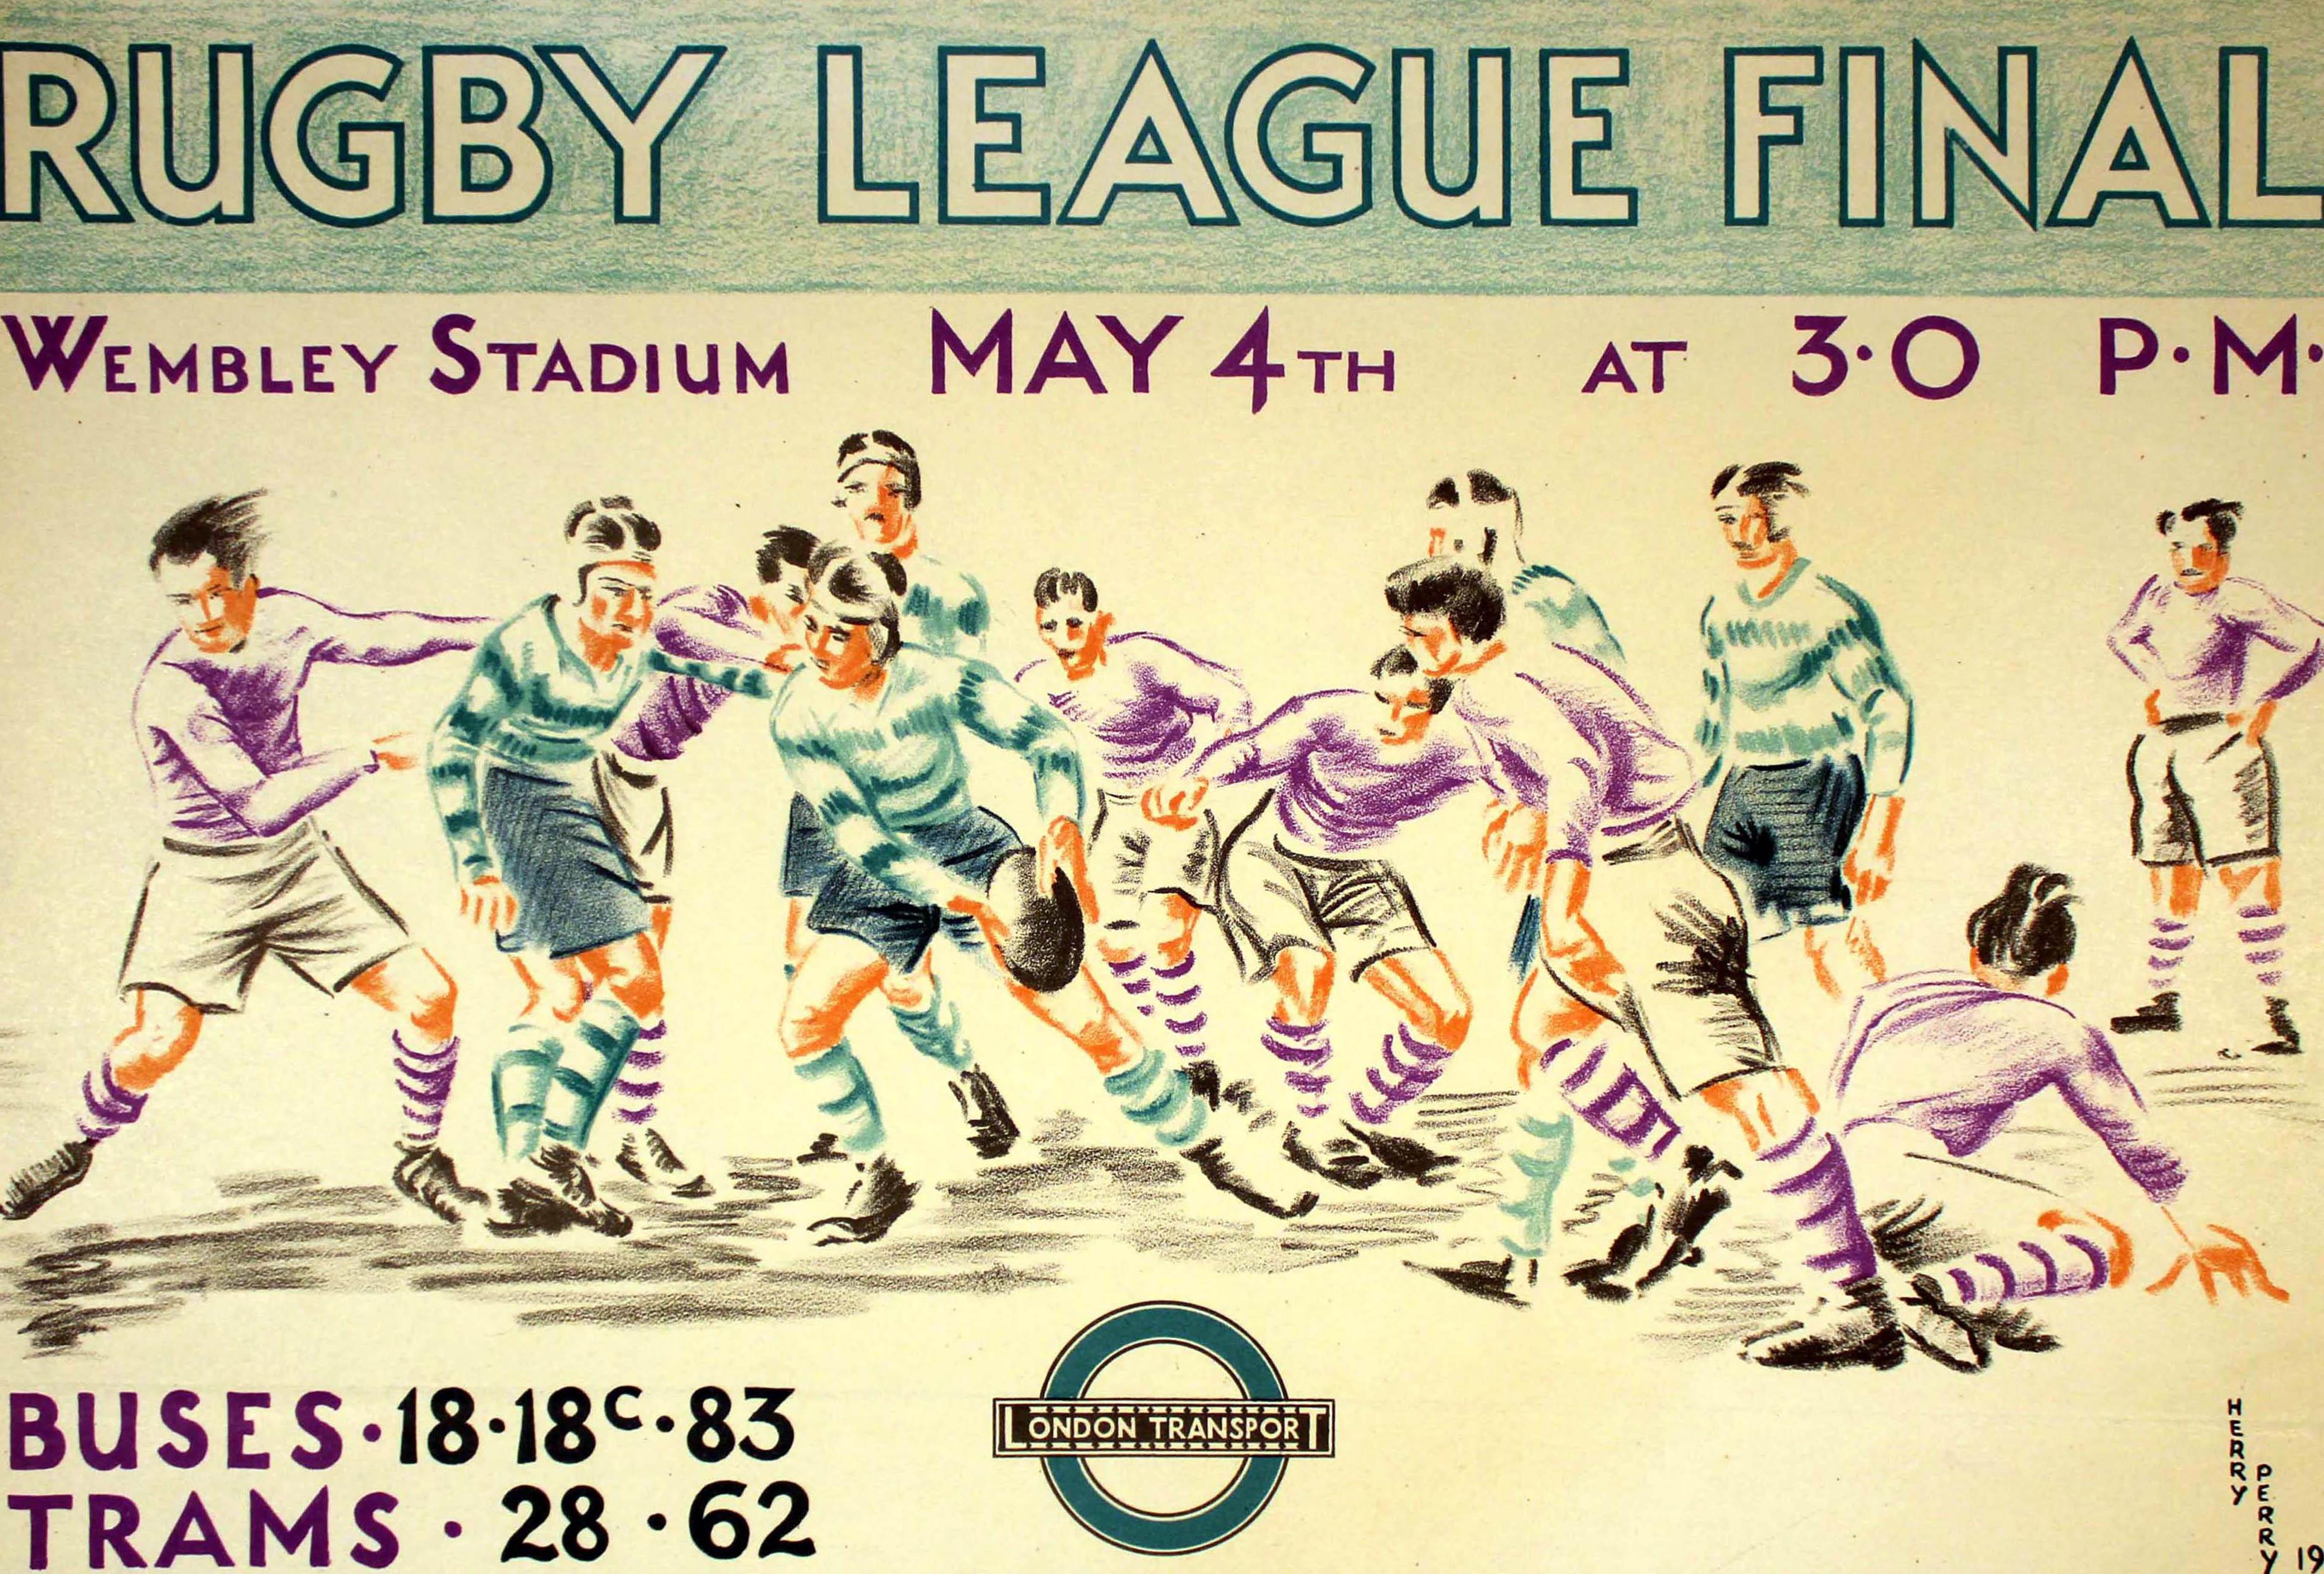 Original vintage London Transport poster for the Rugby League Final Wembley Stadium that took place at 3pm on 4 May 1935. Great design by Heather Perry (known as Herry Perry; 1897-1962) featuring two teams in purple and green in a rugby match